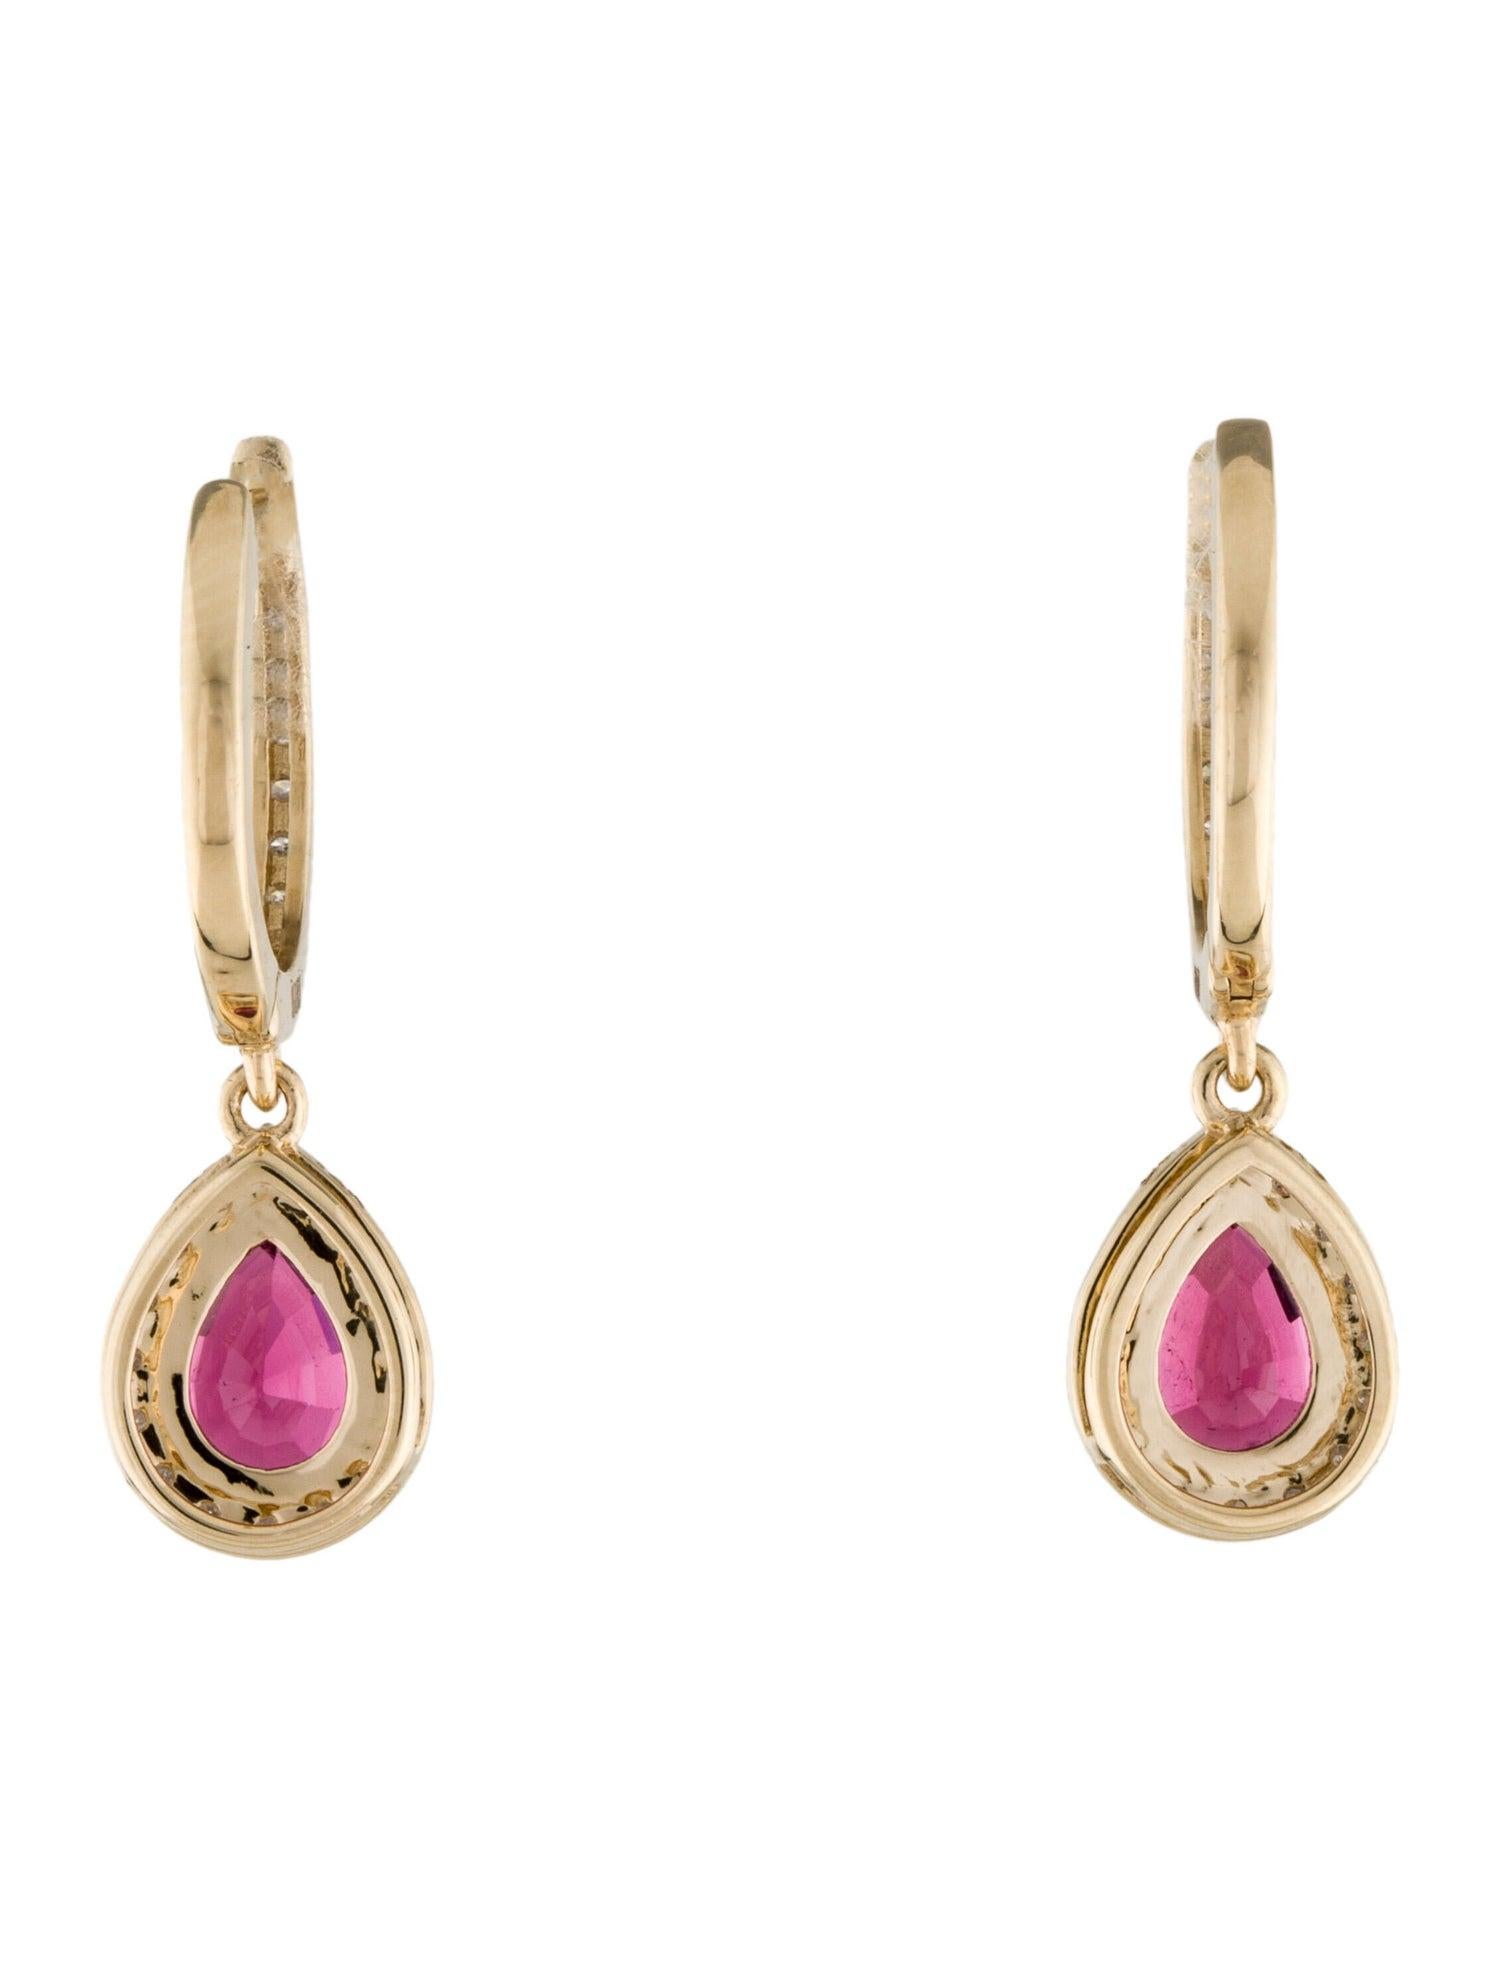 14K Rubellite & Diamond Drop Earrings - Exquisite Elegance, Timeless Glamour In New Condition For Sale In Holtsville, NY